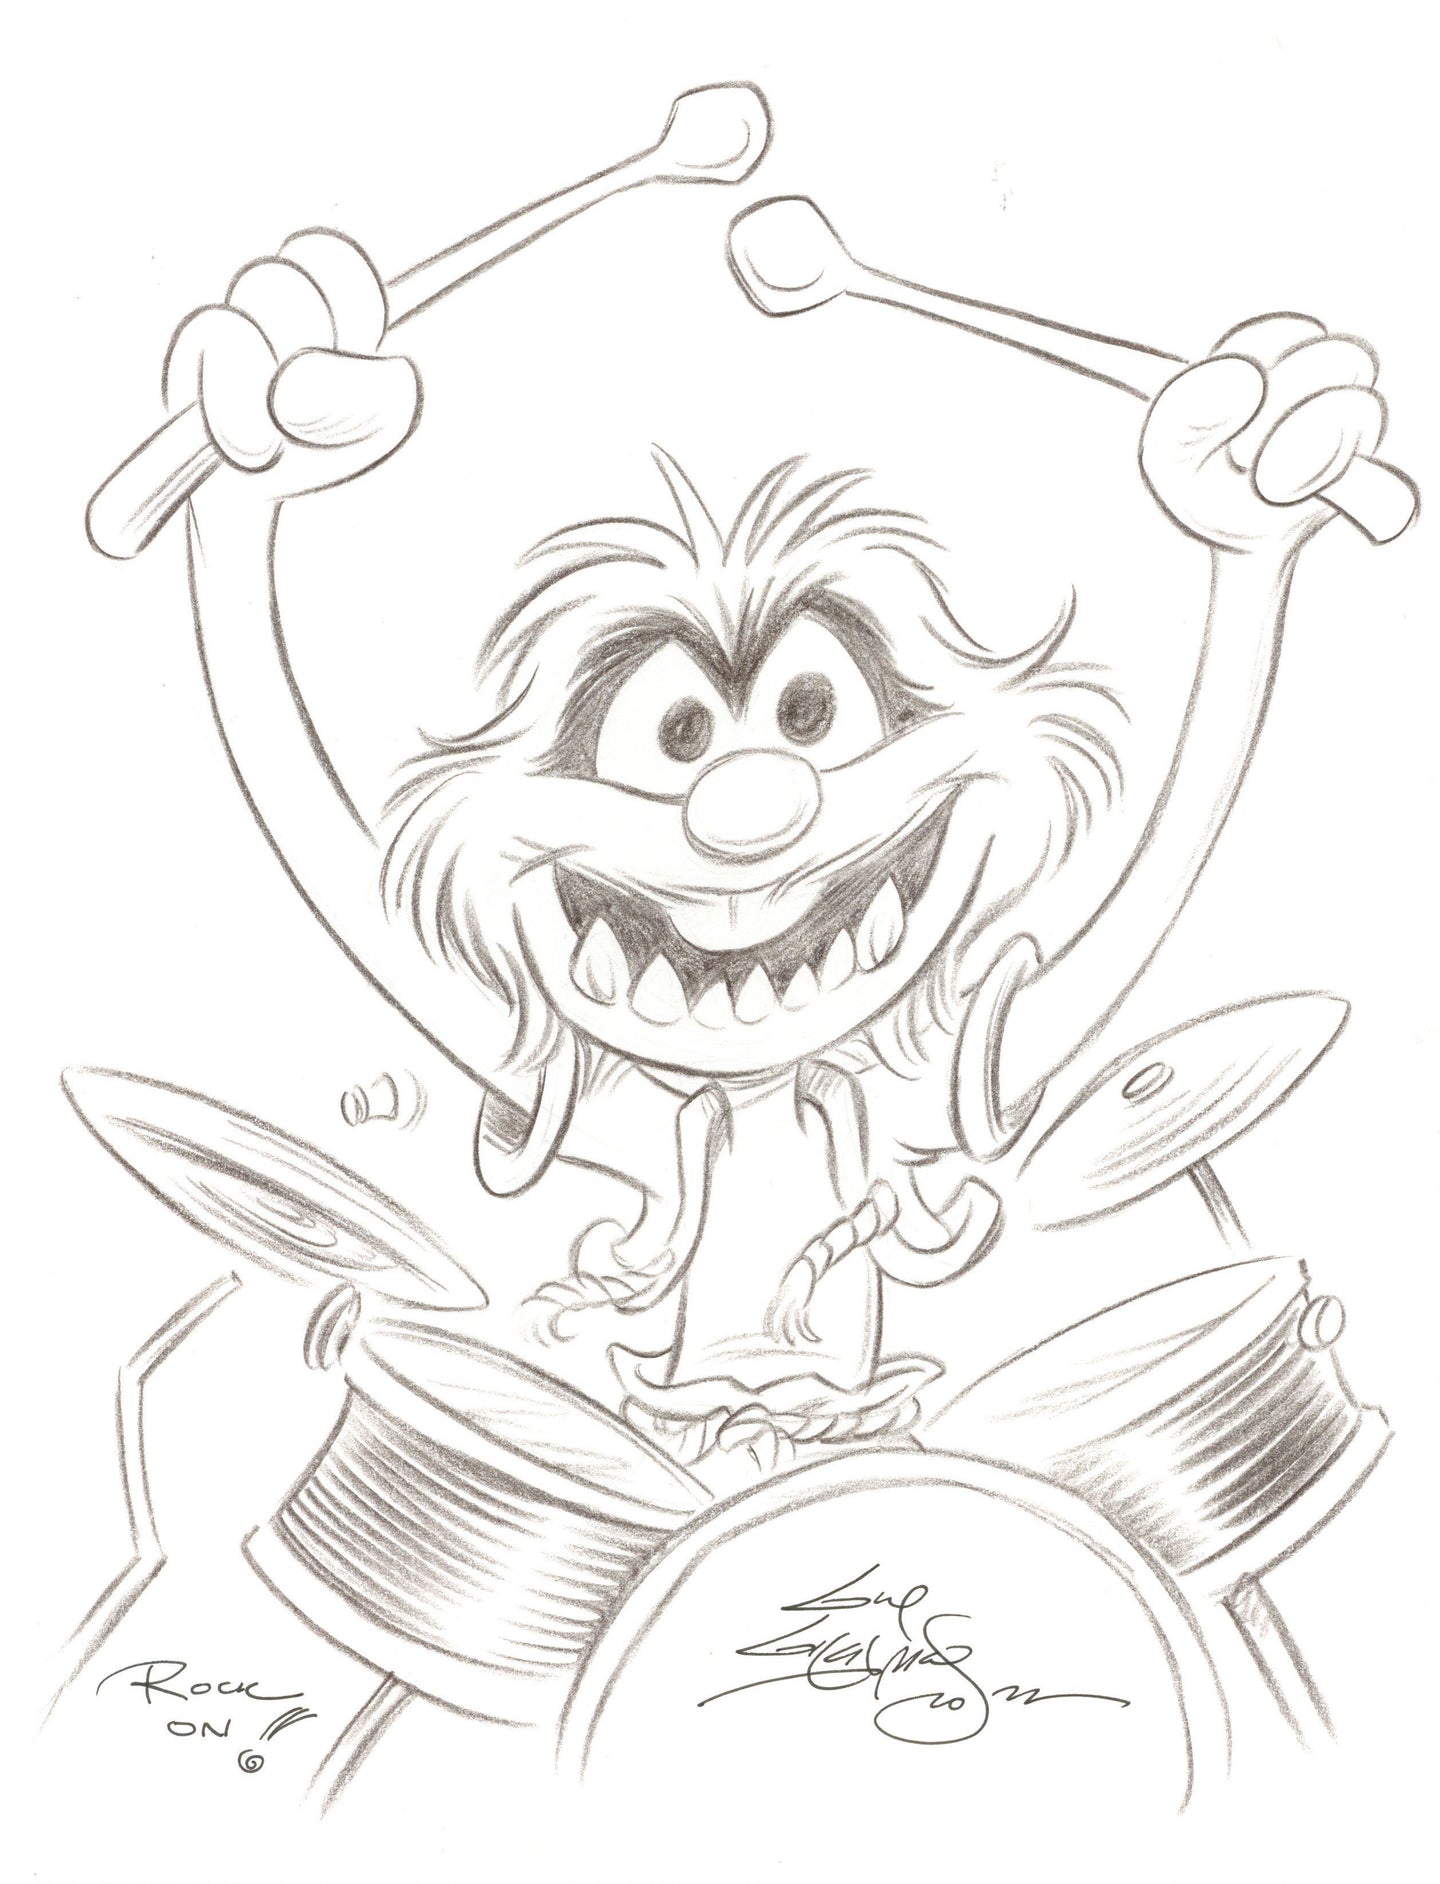 Muppets Animal Original Art 8.5x11 Sketch  - Created by Guy Gilchrist